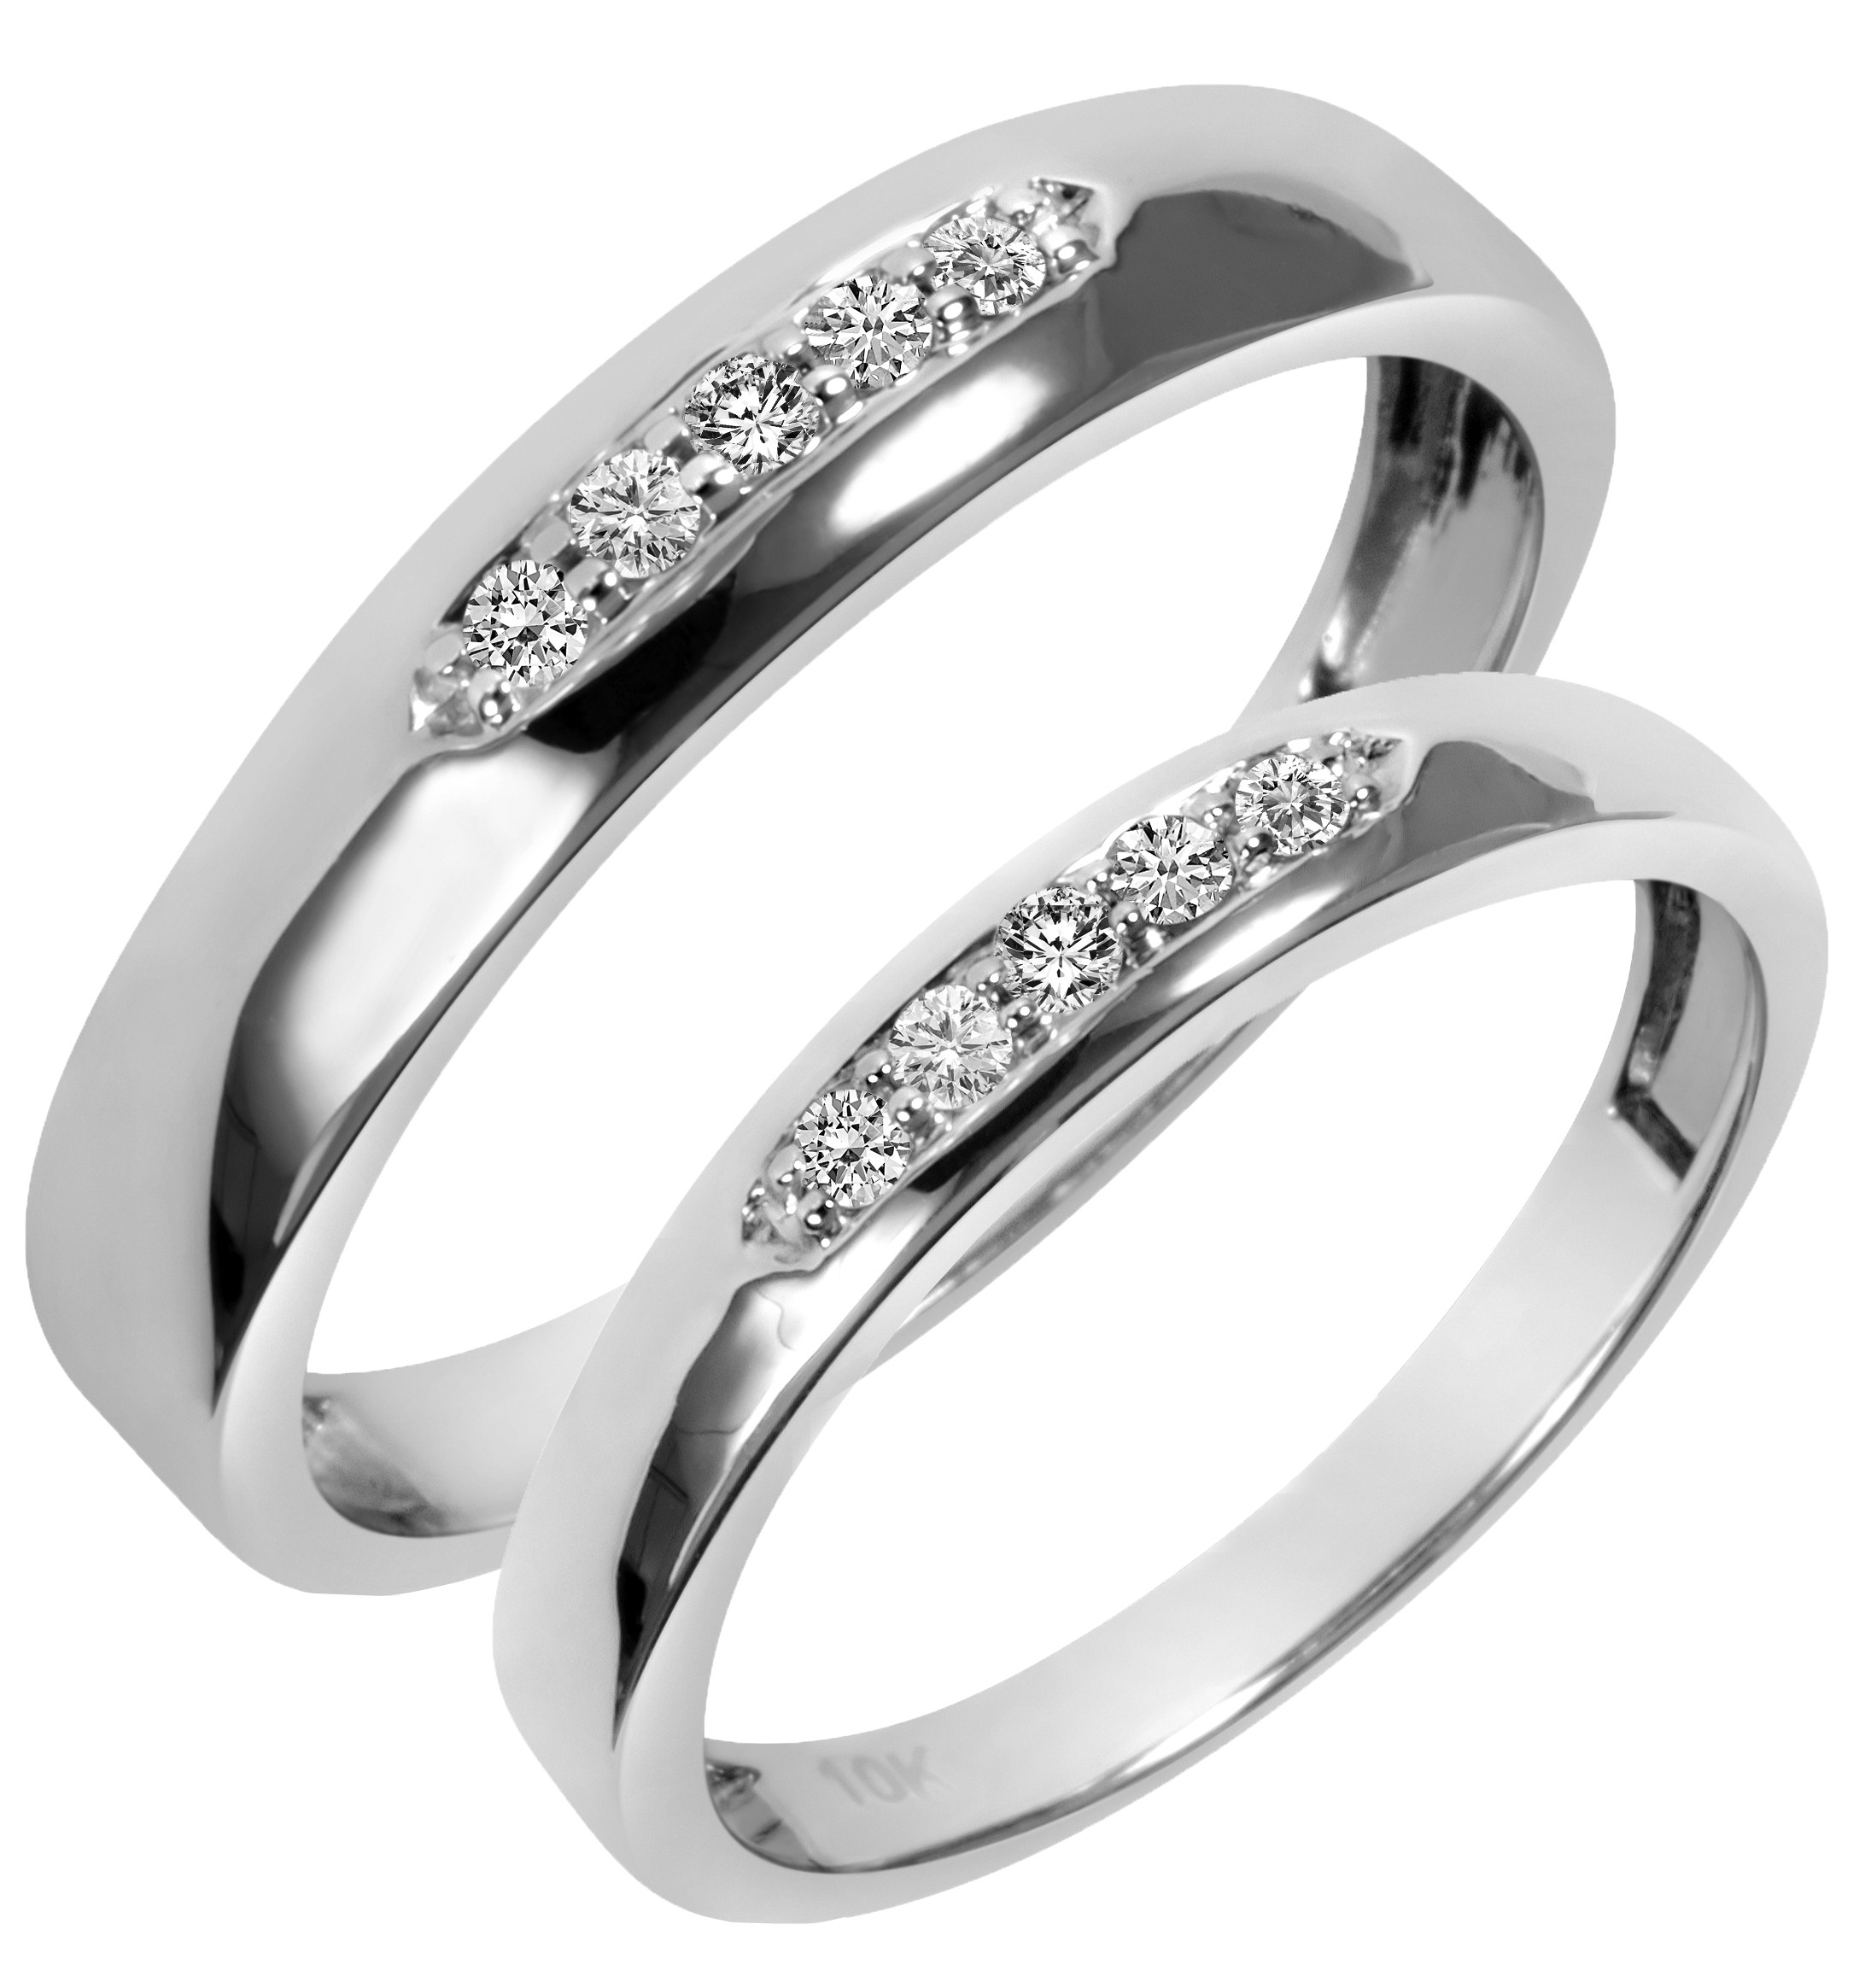 Cheap Matching Wedding Bands
 View Full Gallery of Brilliant him and her wedding bands